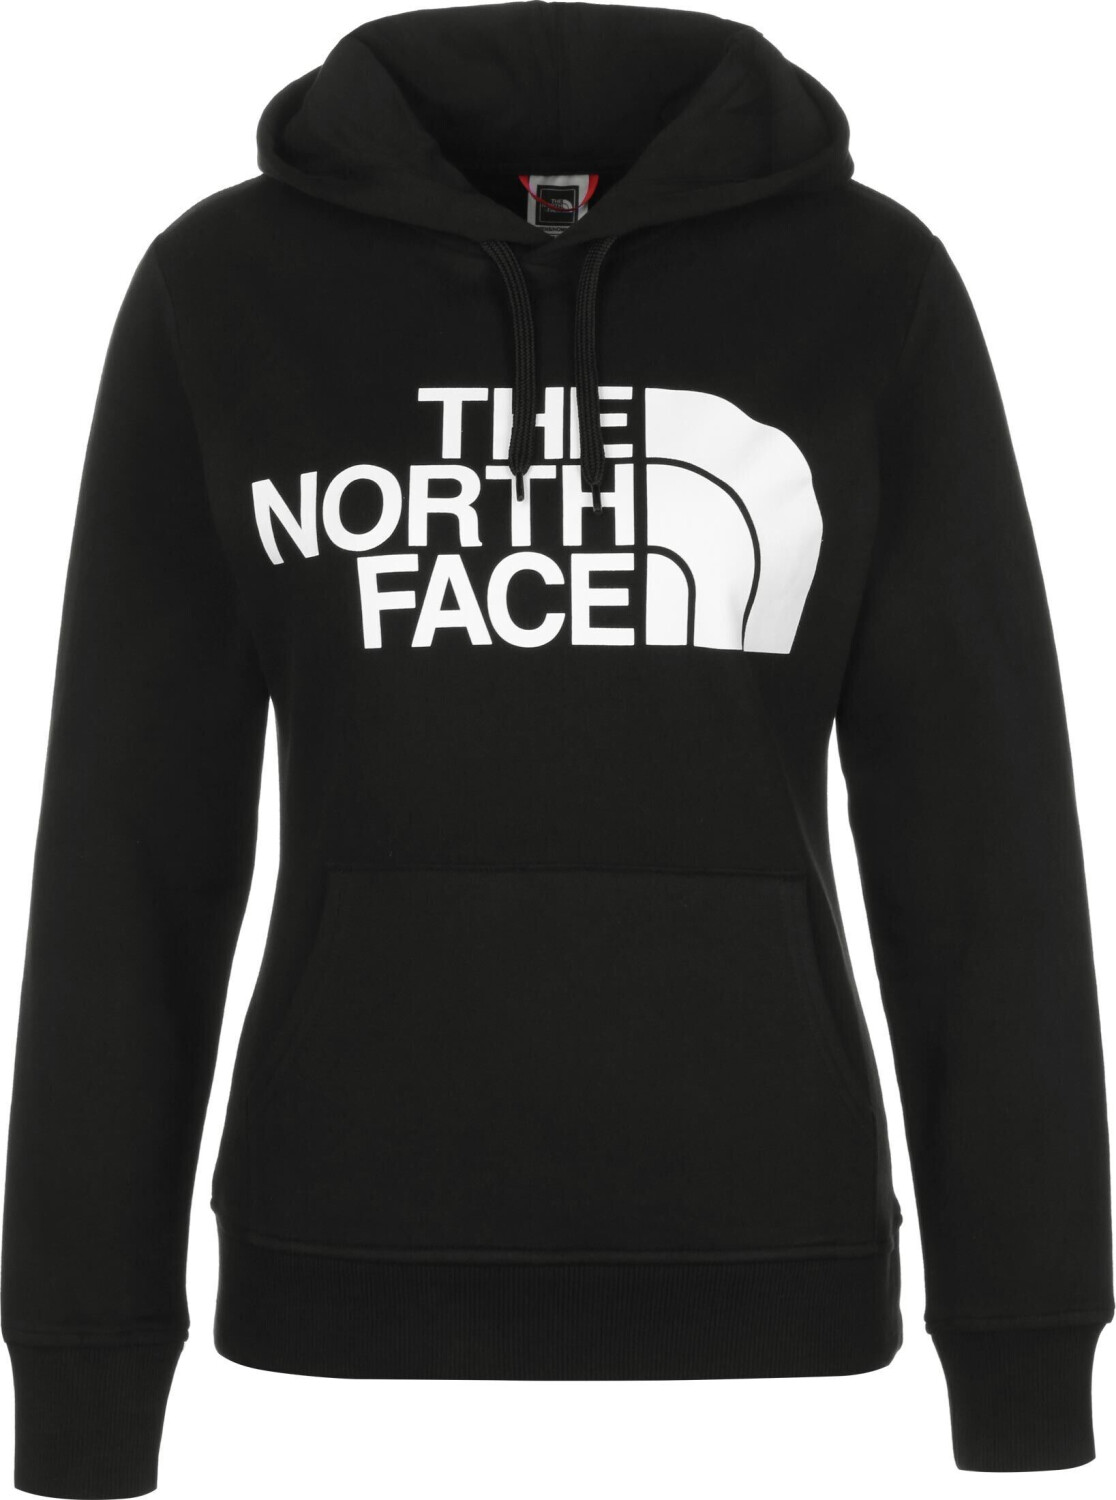 Buy The North Face Women's Standard Hoodie tnf black/white from £35.00 ...